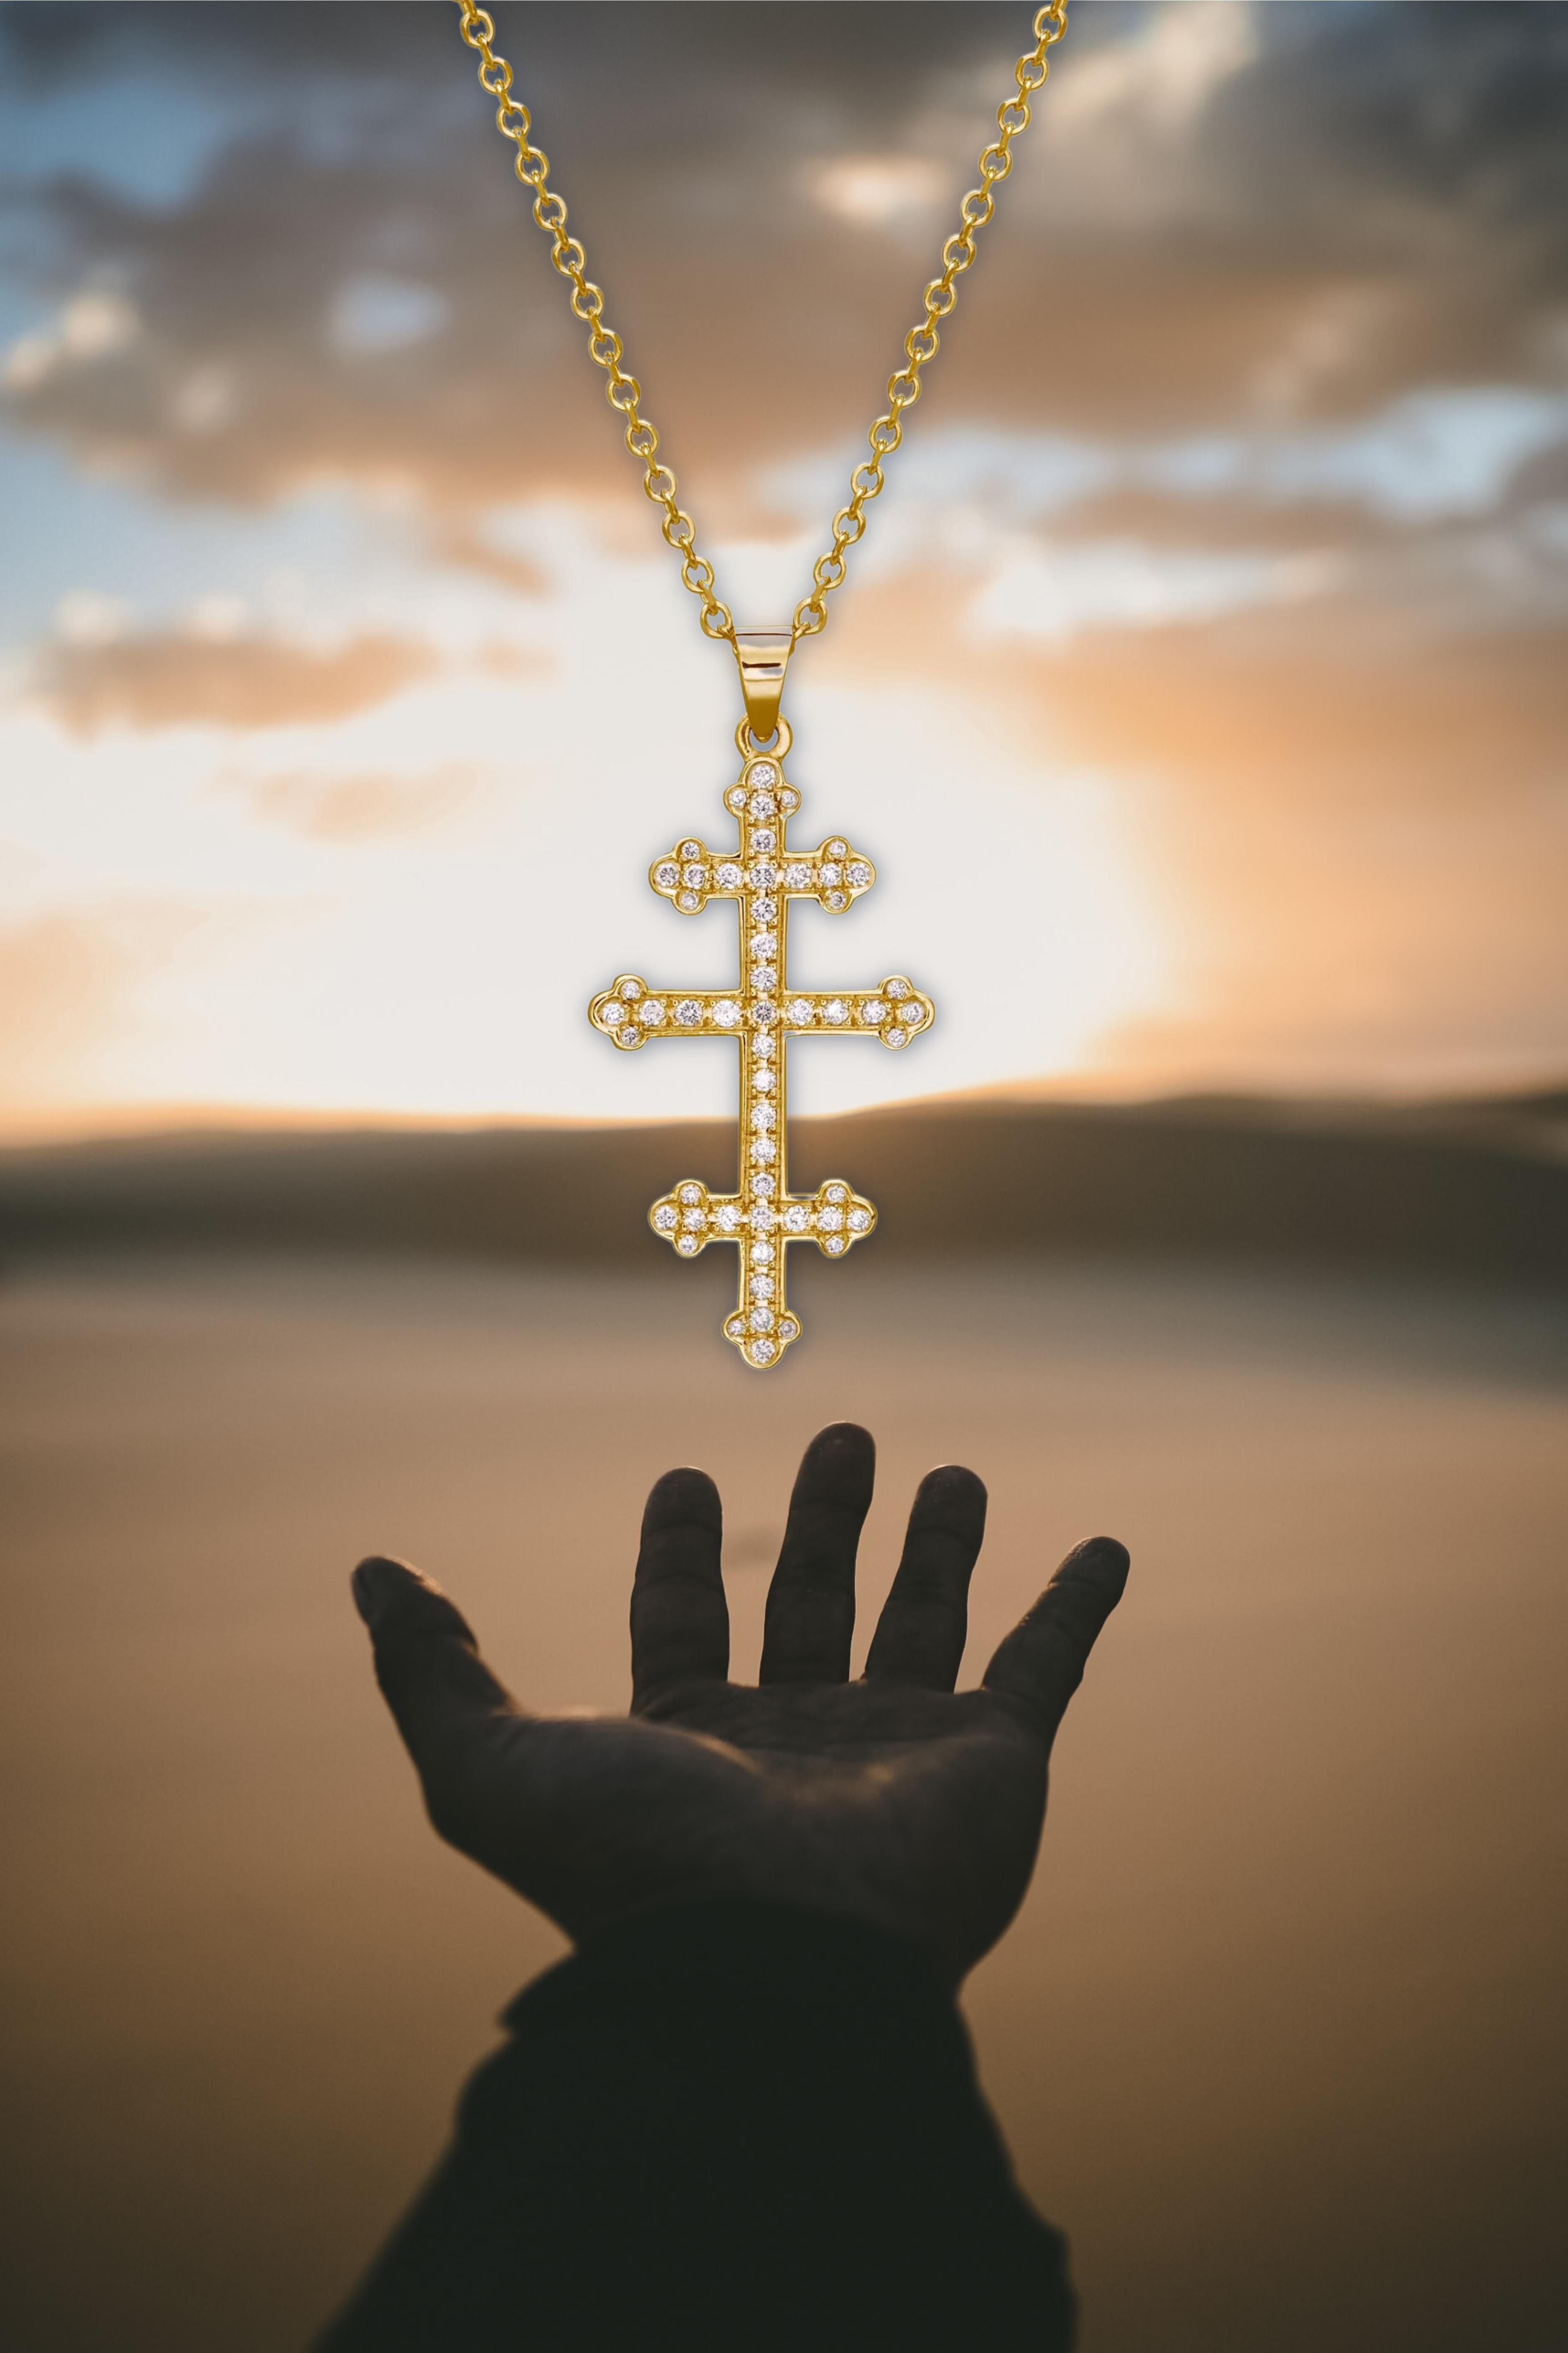 Women's or Men's Pope's Cross Pendant Necklace in 18Kt Yellow Gold with Pave Diamonds GMCKS For Sale